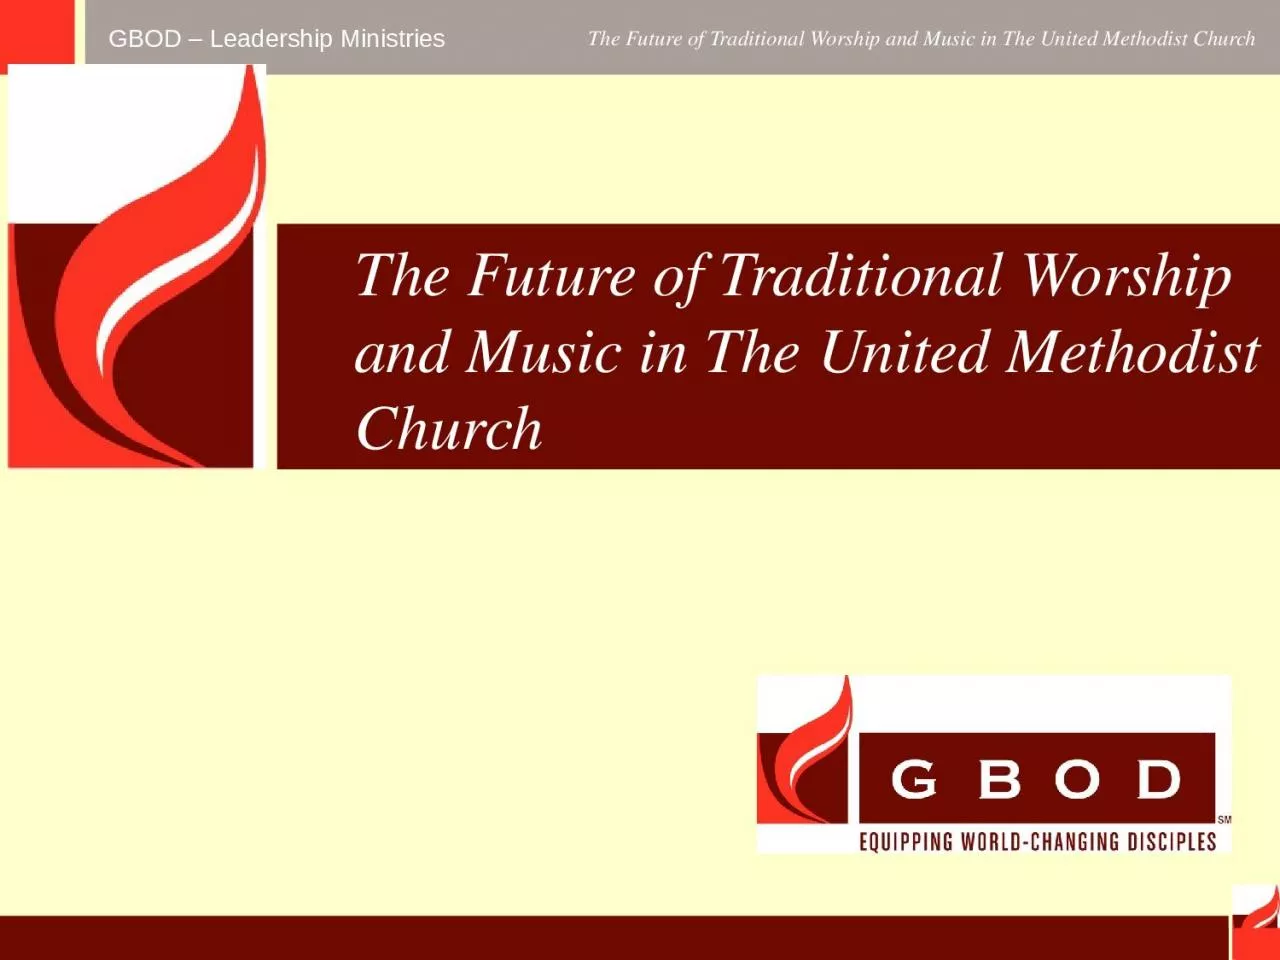 The Future of Traditional Worship and Music in The United Methodist Church